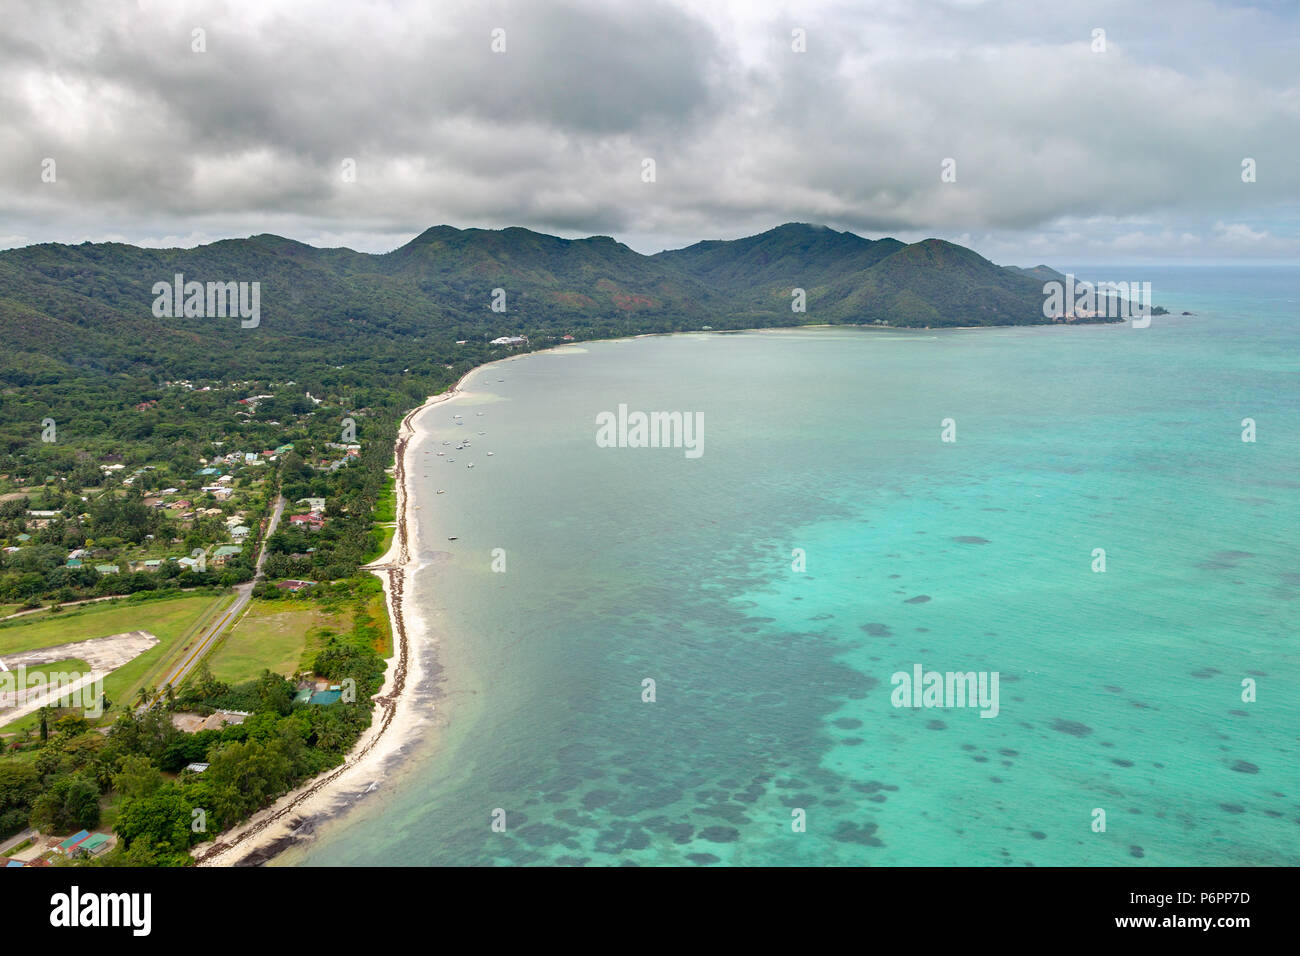 Aerial view of the Grande Anse on Praslin, Seychelles in the Indian Ocean. Stock Photo